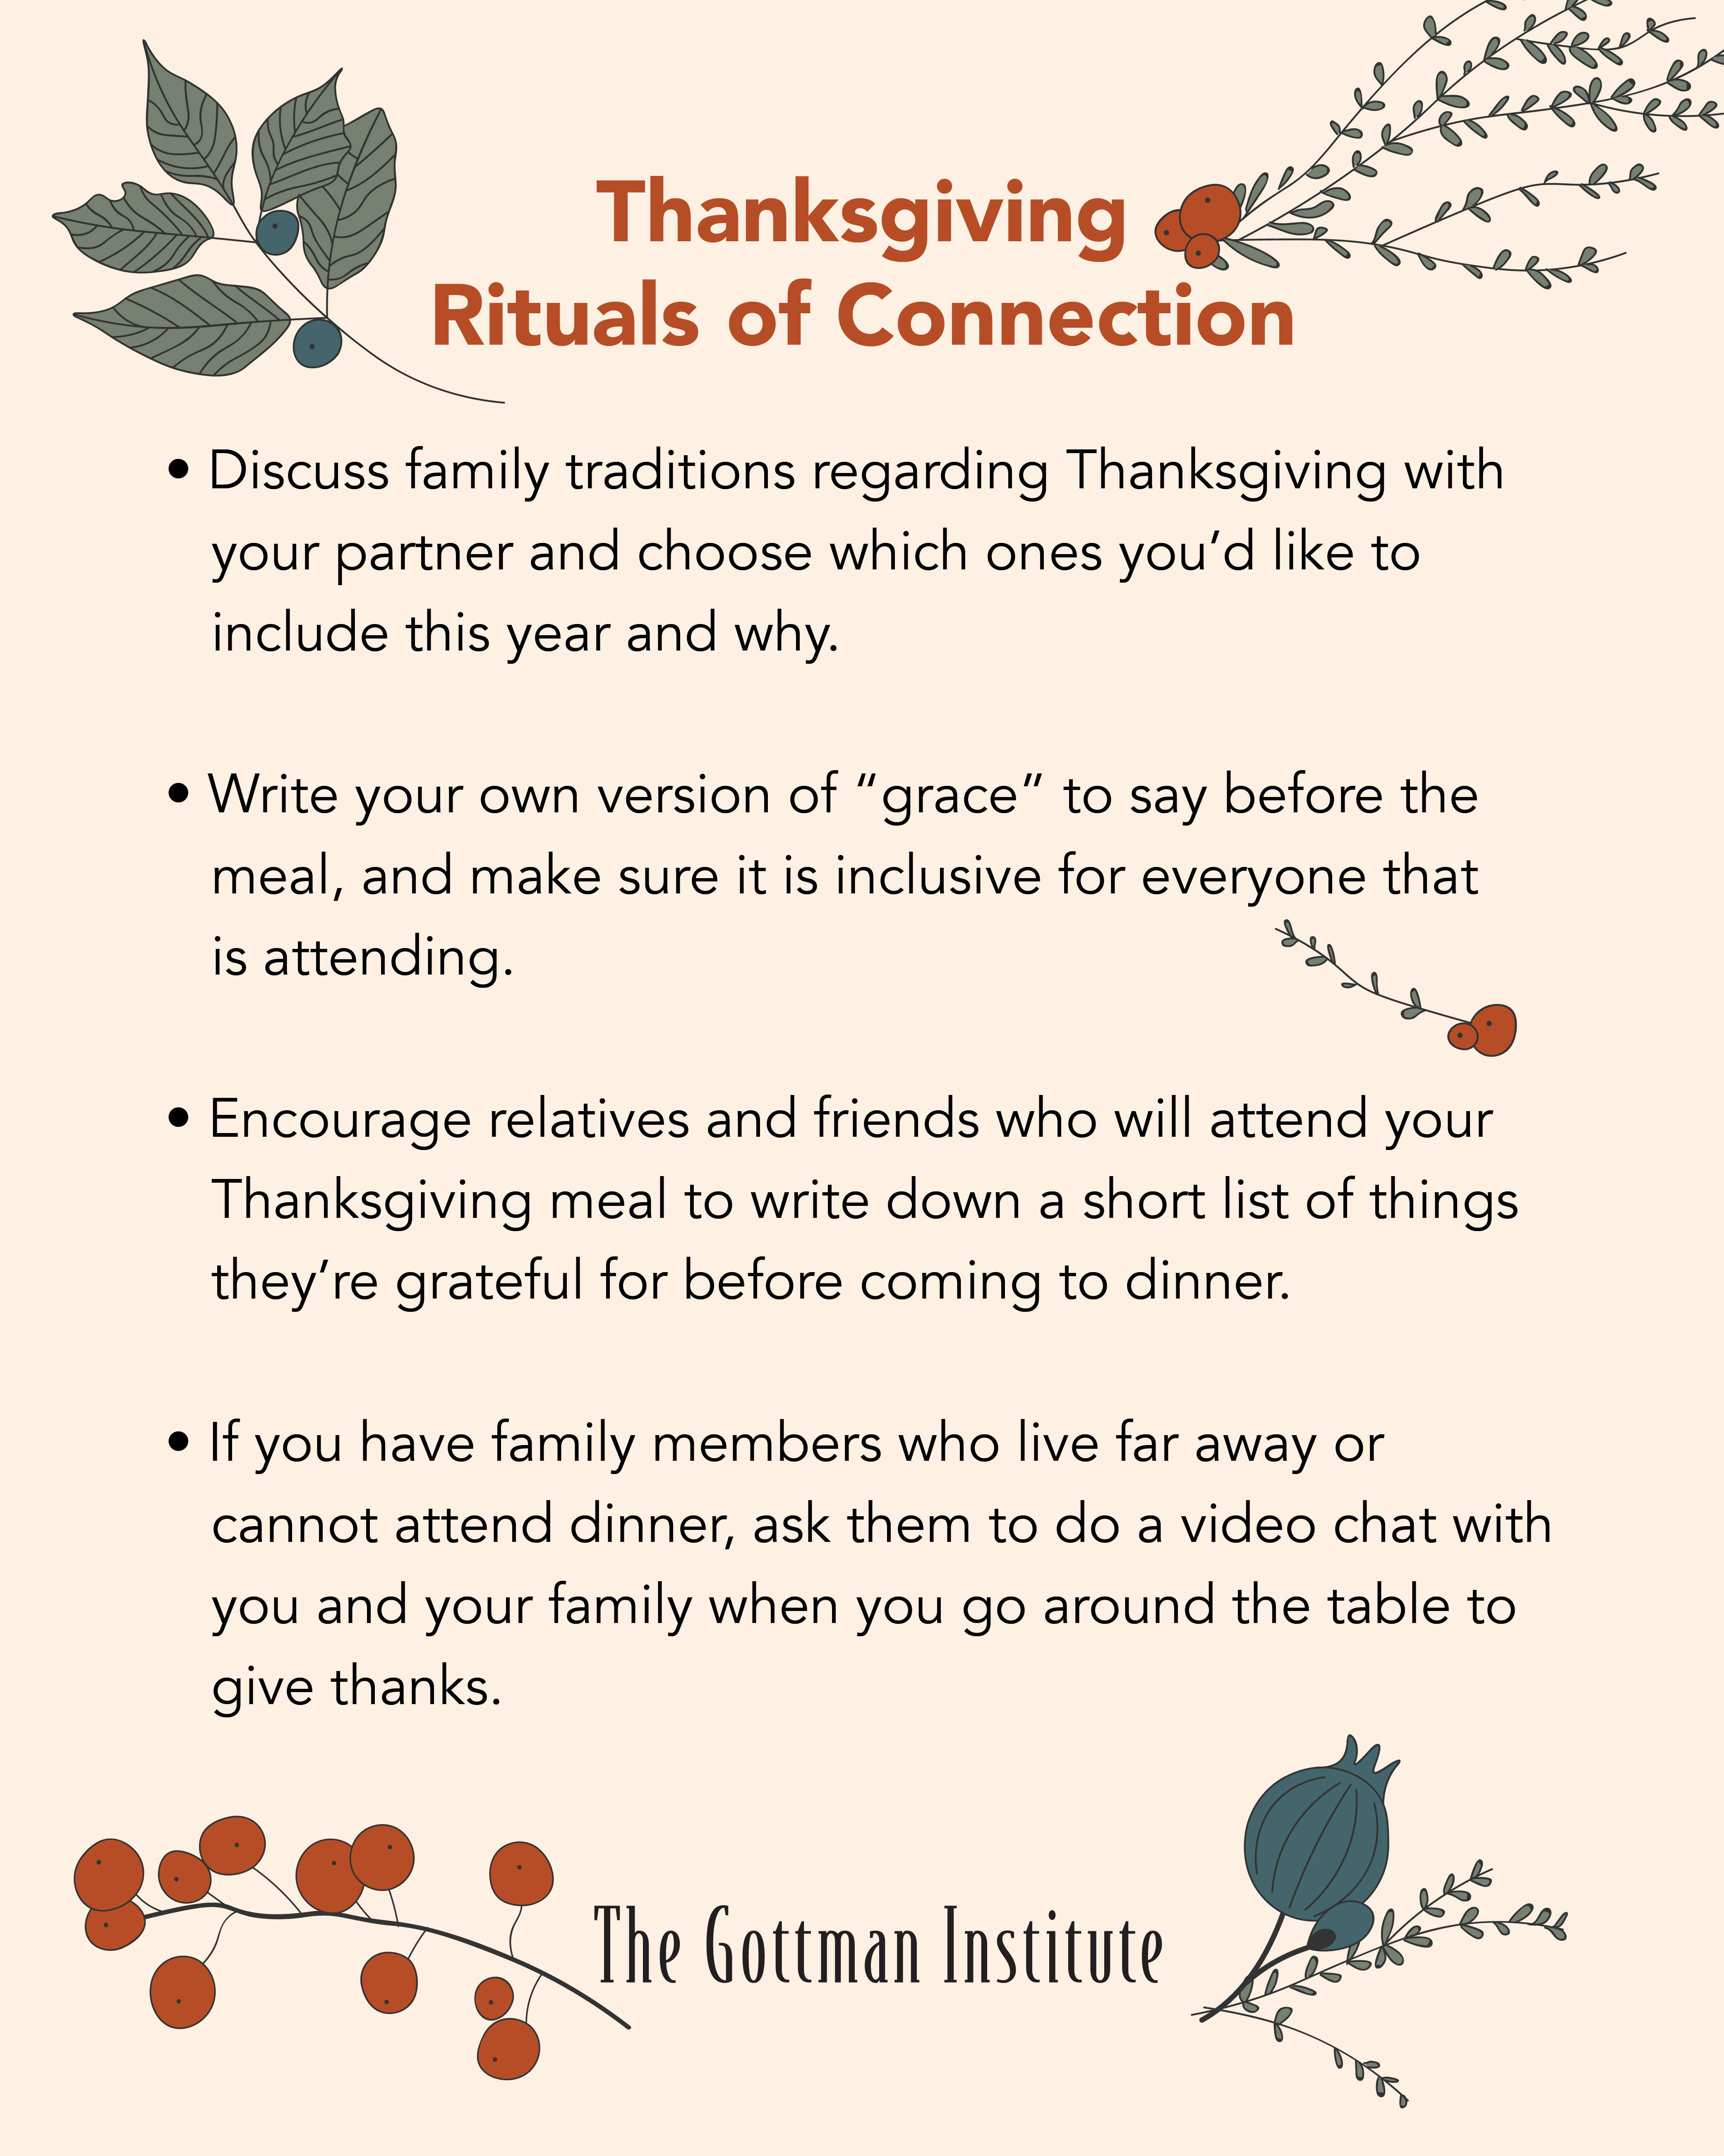 Thanksgiving Rituals of Connection